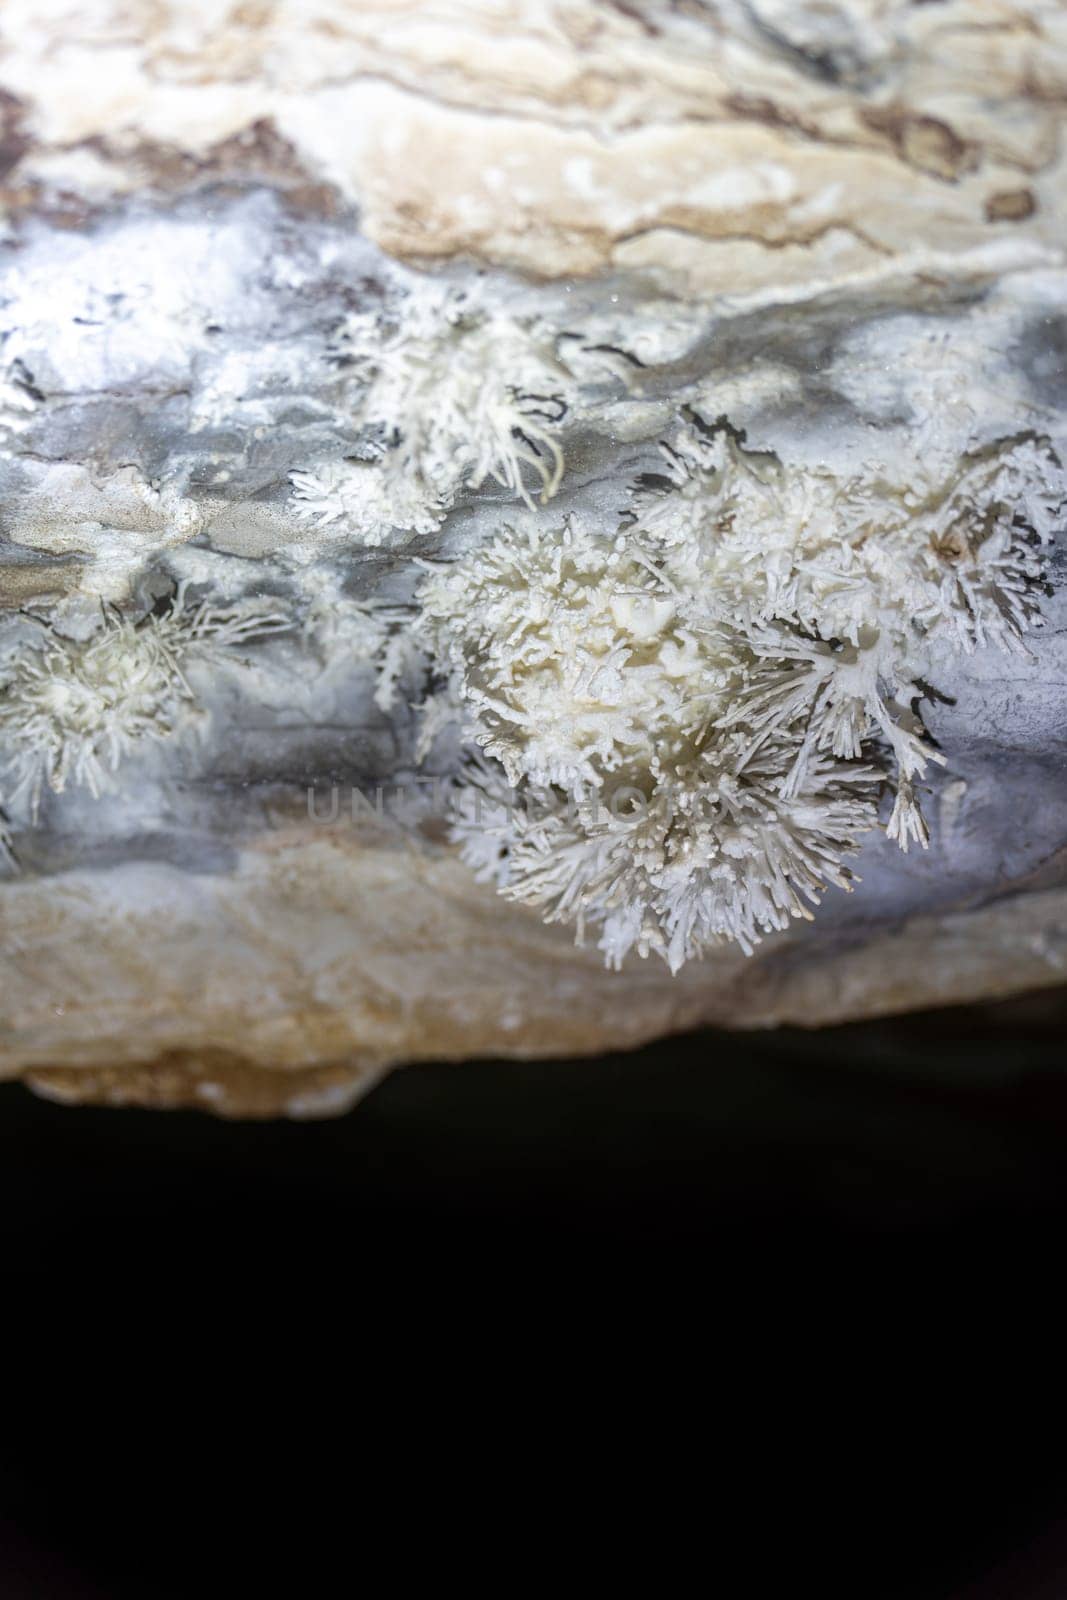 Stunning Crystal Formations in an Underground Cave Setting by FerradalFCG